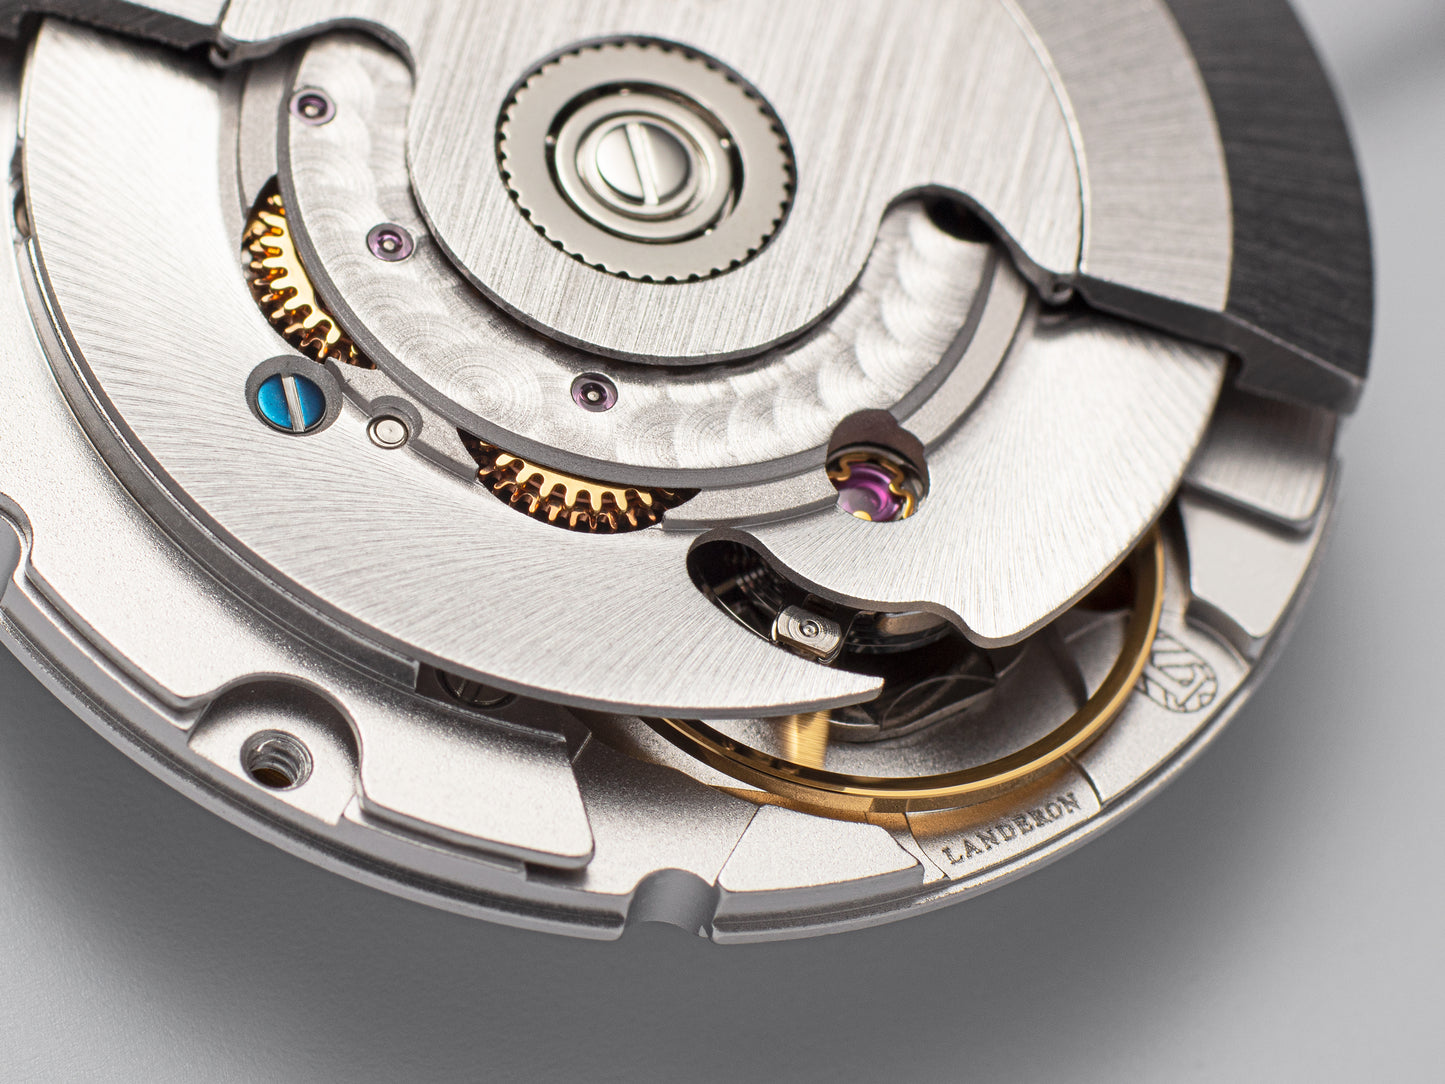 BWG-ISARIA-Automatic-watch-Swiss-Movement-Landeron-L24-manufacture-movement-detail